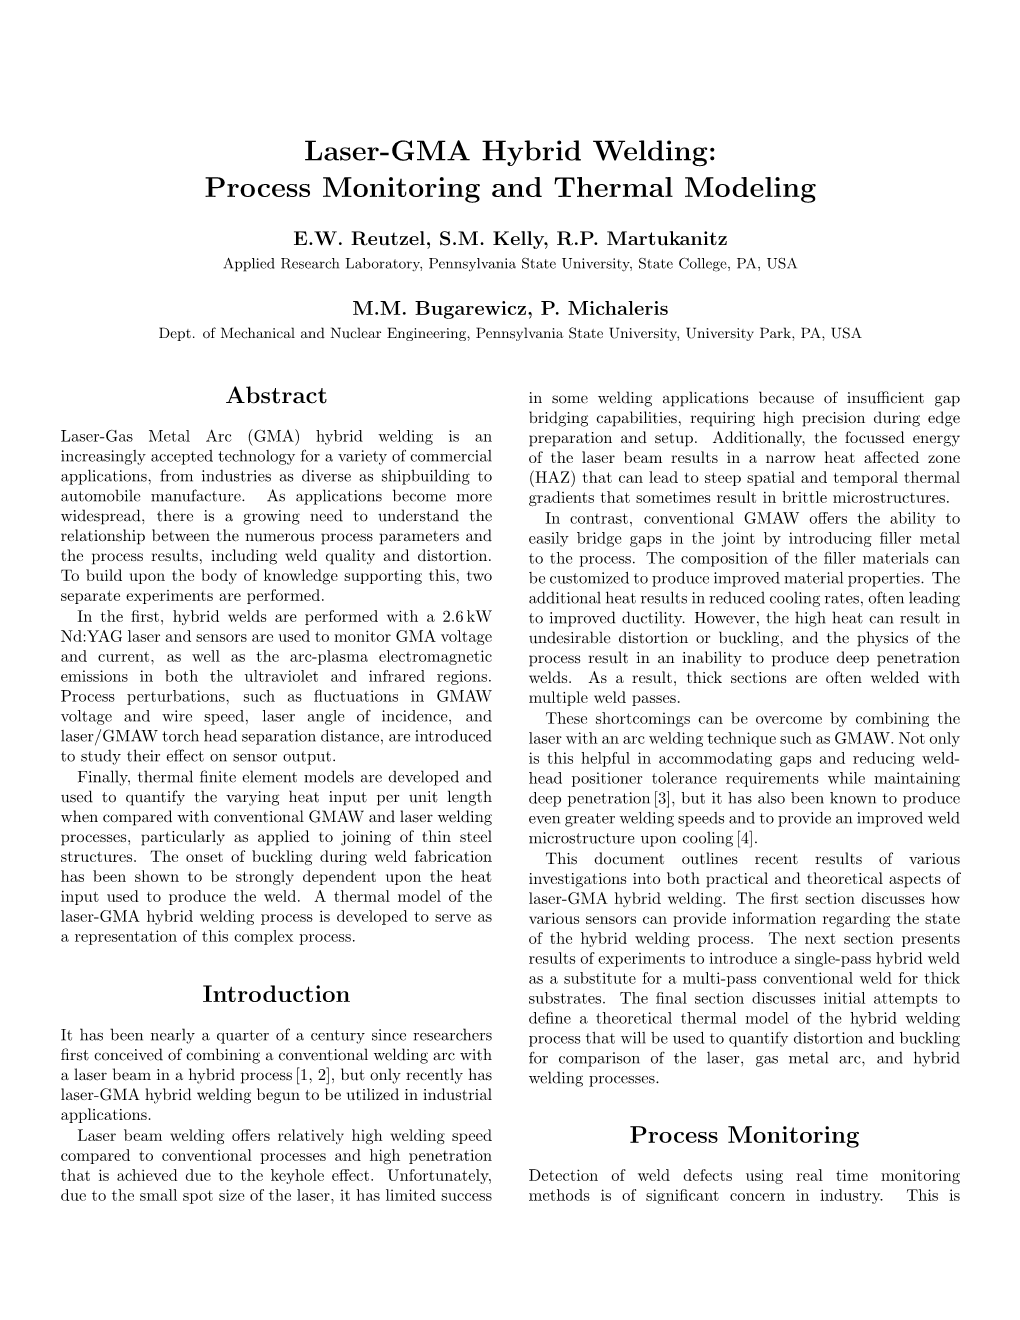 Laser-GMA Hybrid Welding: Process Monitoring and Thermal Modeling